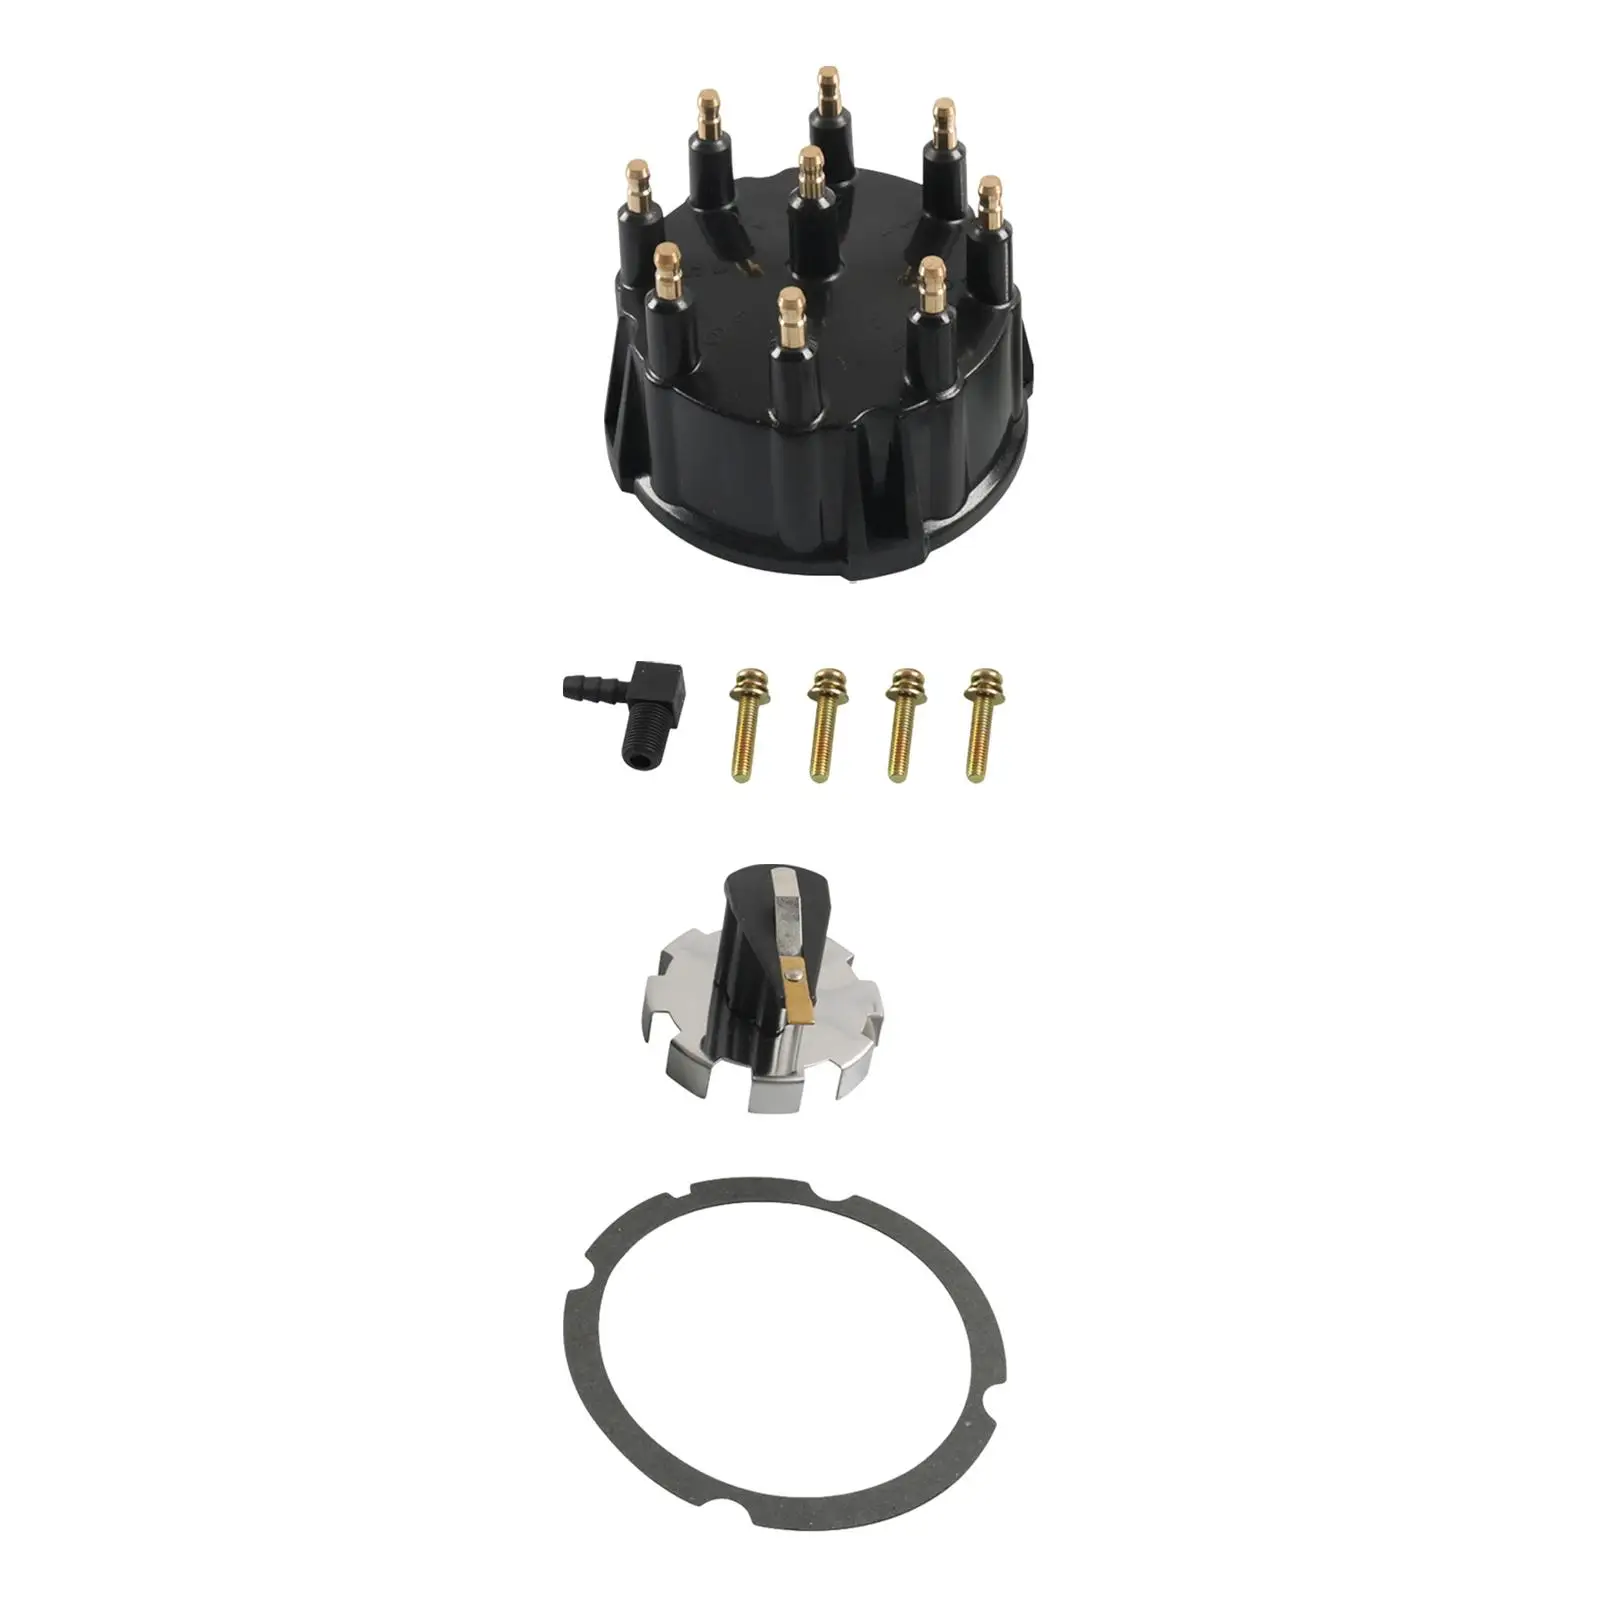 Distributor Cap Tune up Set Spare Parts Accessories 805759Q3 Replaces for All 5.0 5.7 7.4 8.2 V8 W/ Bolt Ignition 1980-2003